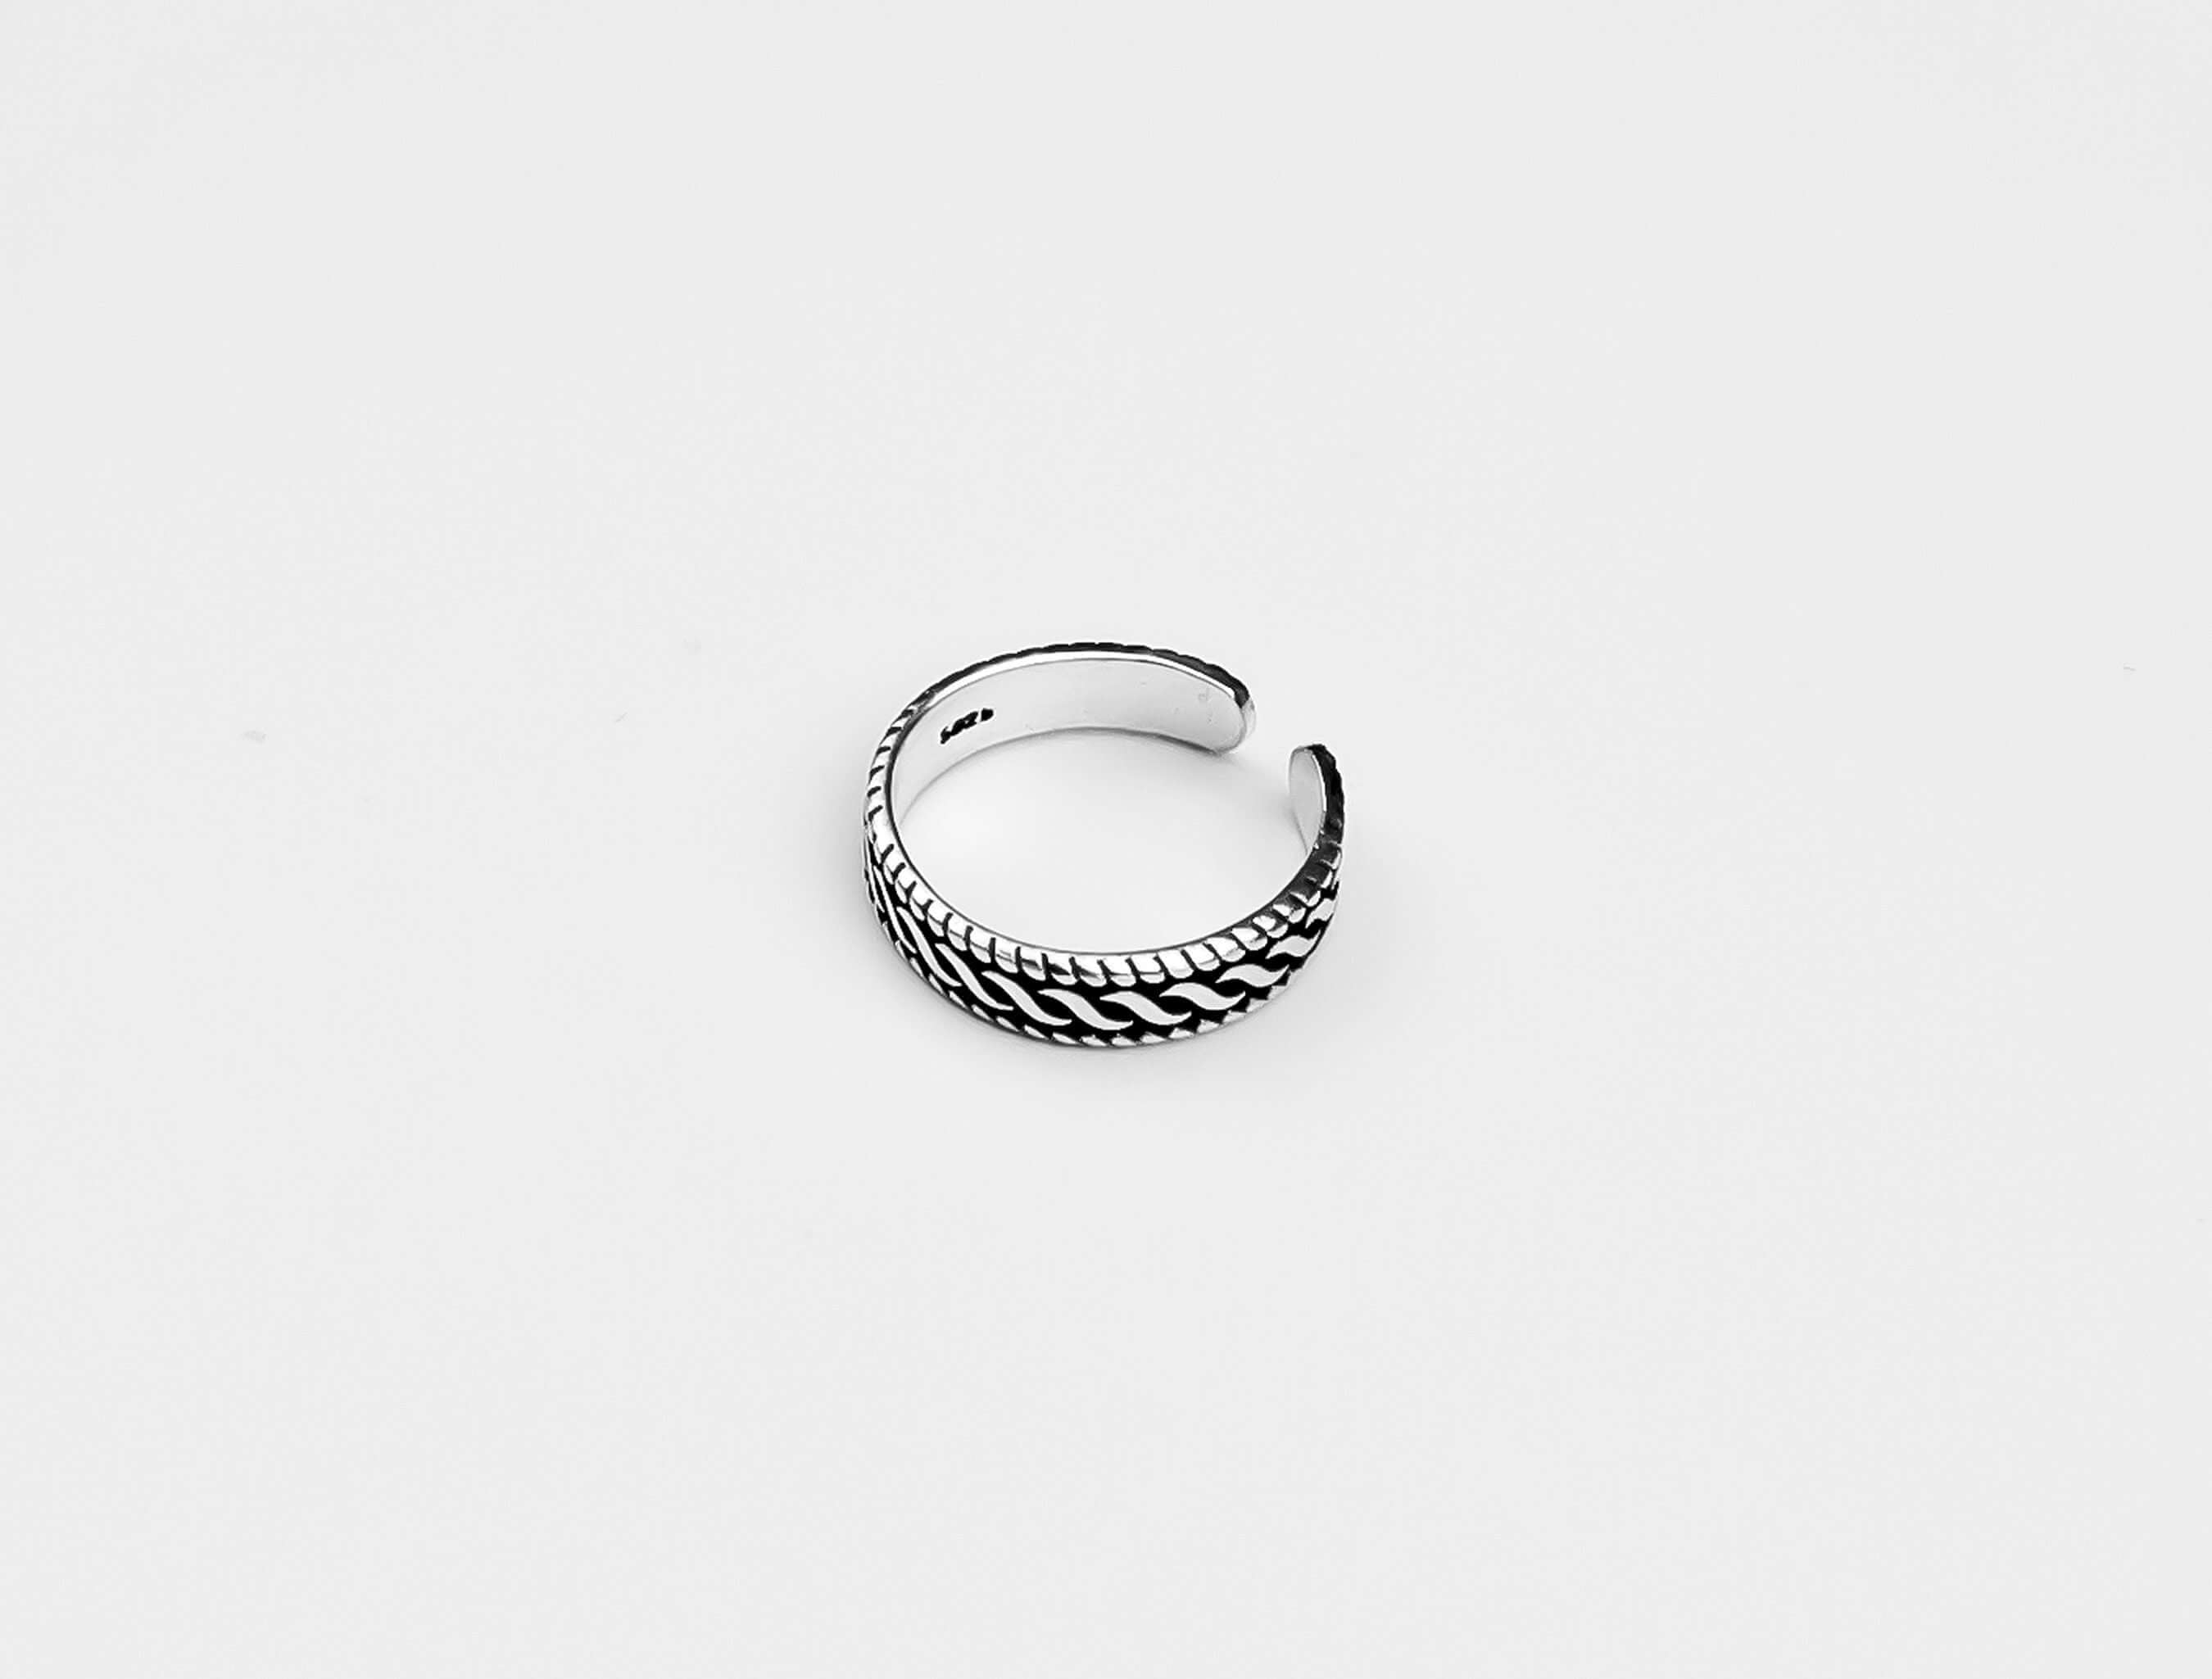 Chain Style Chunky Silver Ring, Boho Silver Ring, Adjustable Silver Ring, Best Gift for Her, Sterling Silver Knitting Pattern Thin Ring